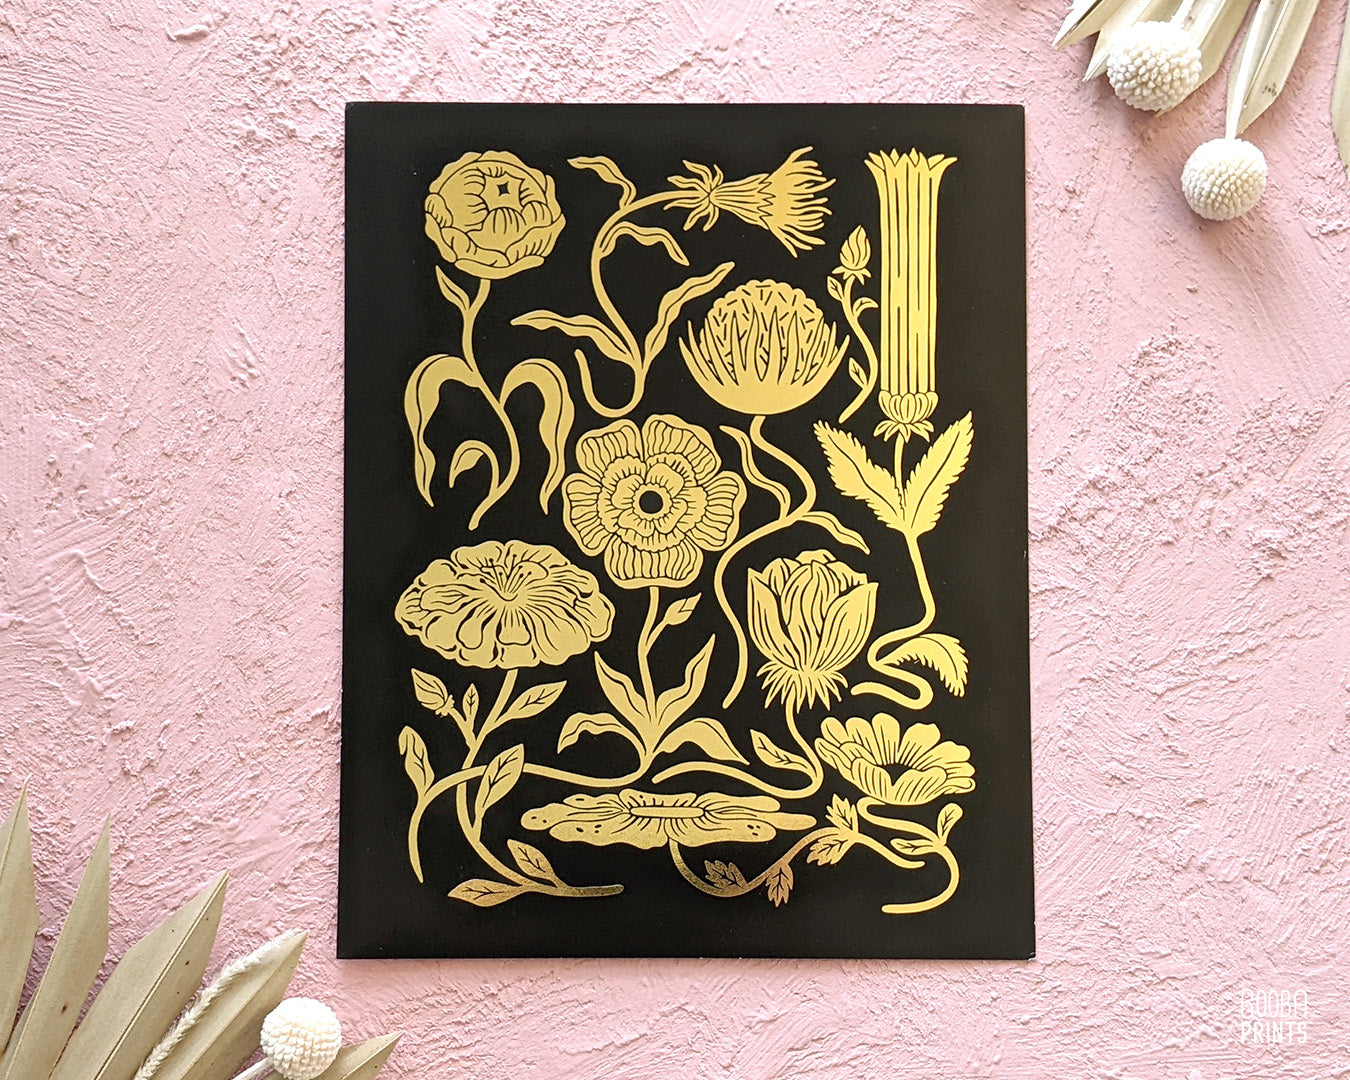 Gold flower print, digitally printed gold foil layer and black ink over stain card stock paper. Elegant beautiful print for home decor. Flower lover gift, gift for home decor, housewarming gift, birthday gift. Art by Booba Prints